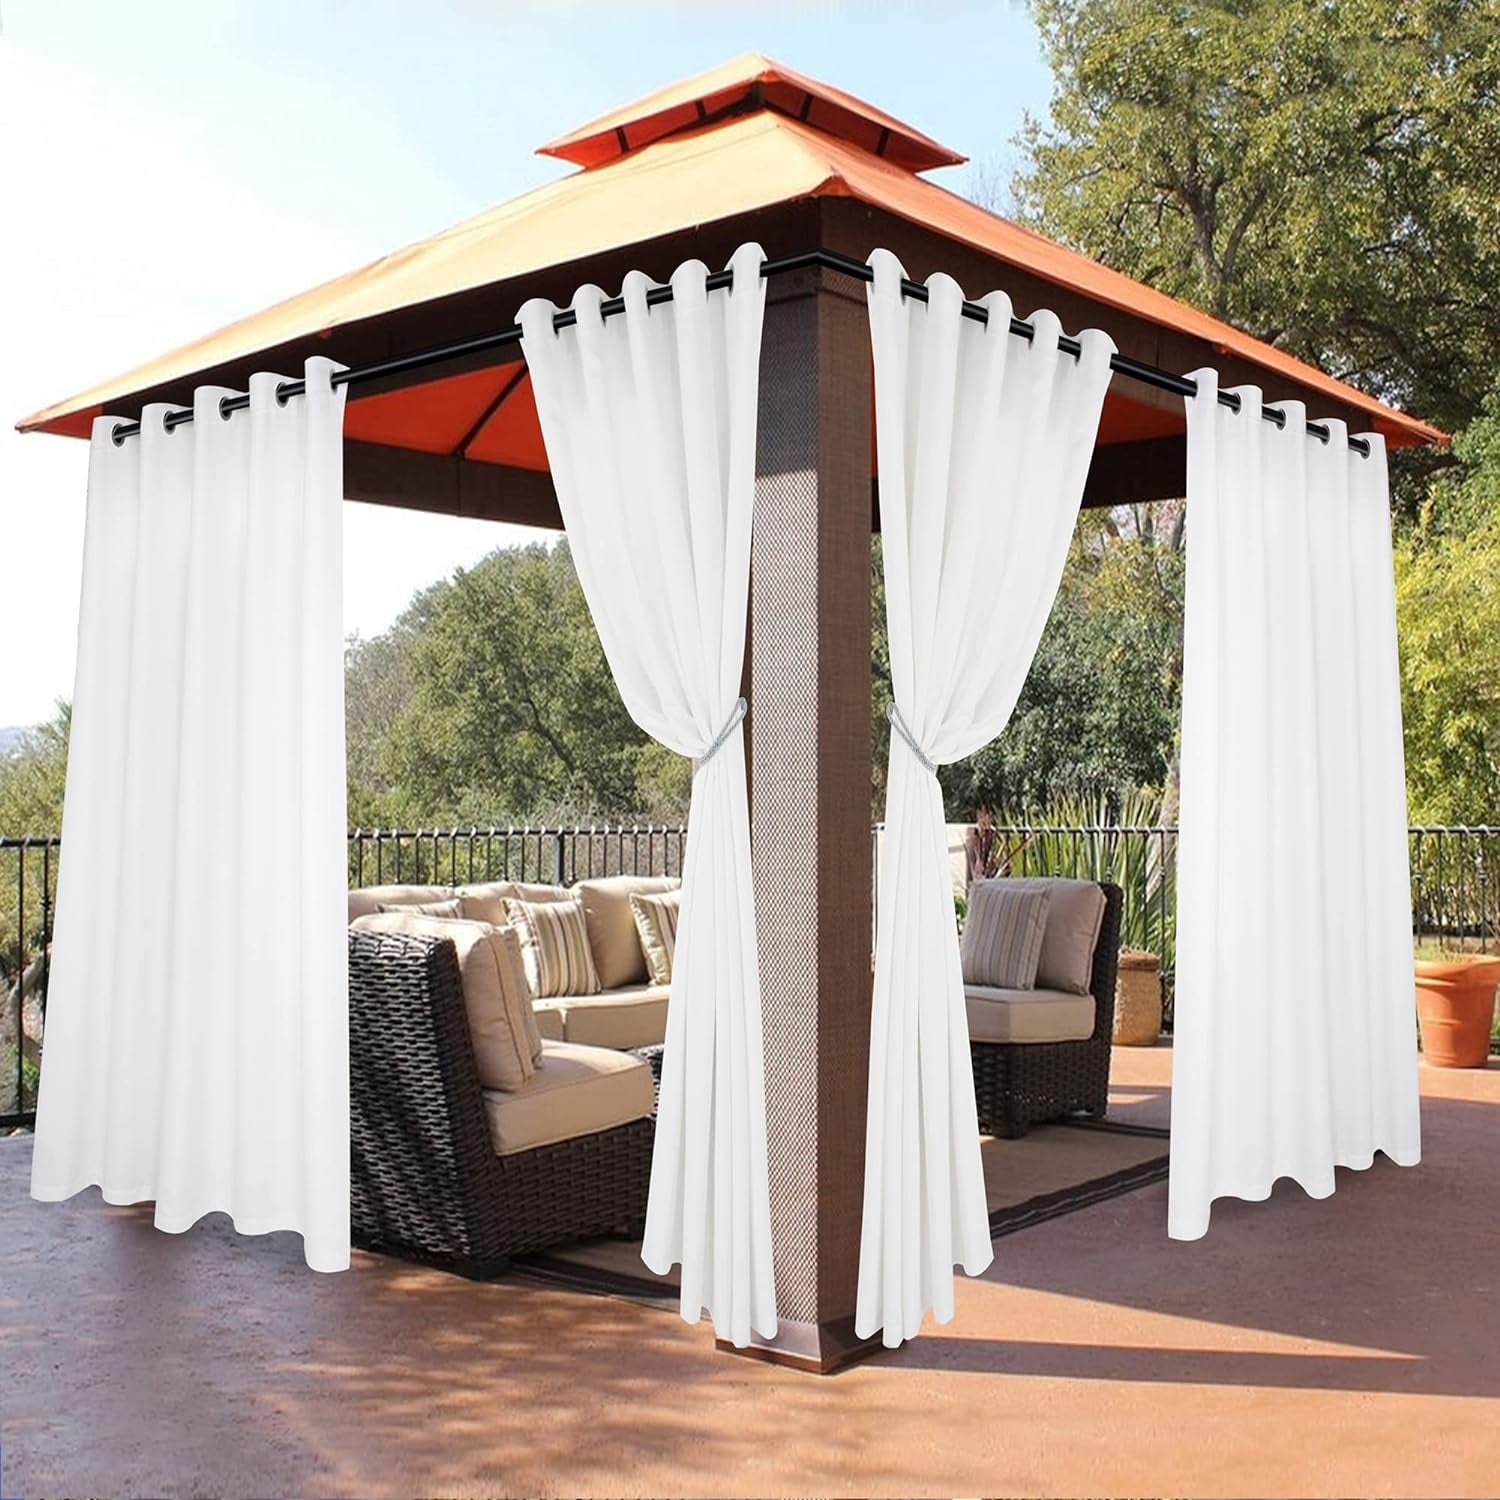 BONZER Outdoor Curtains for Patio Waterproof - Light Blocking Weather Resistant Privacy Grommet Blackout Curtains for Gazebo, Porch, Pergola, Cabana, Deck, Sunroom, 1 Panel, 52W X 84L Inch, Silver  BONZER White 70W X 84 Inch 